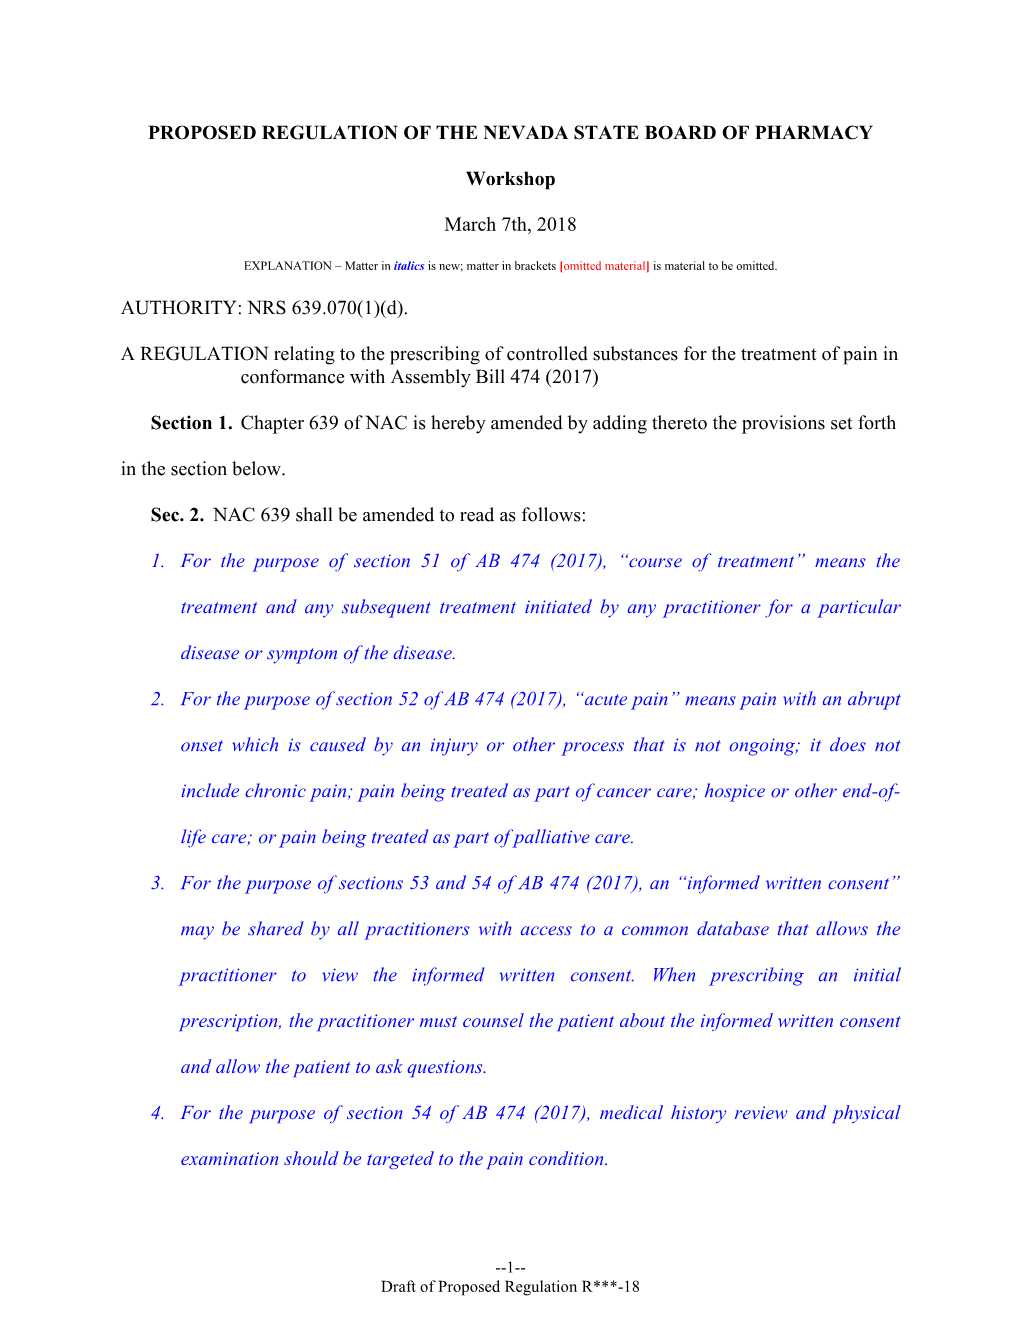 Proposed Regulation of the Nevada State Board of Pharmacy